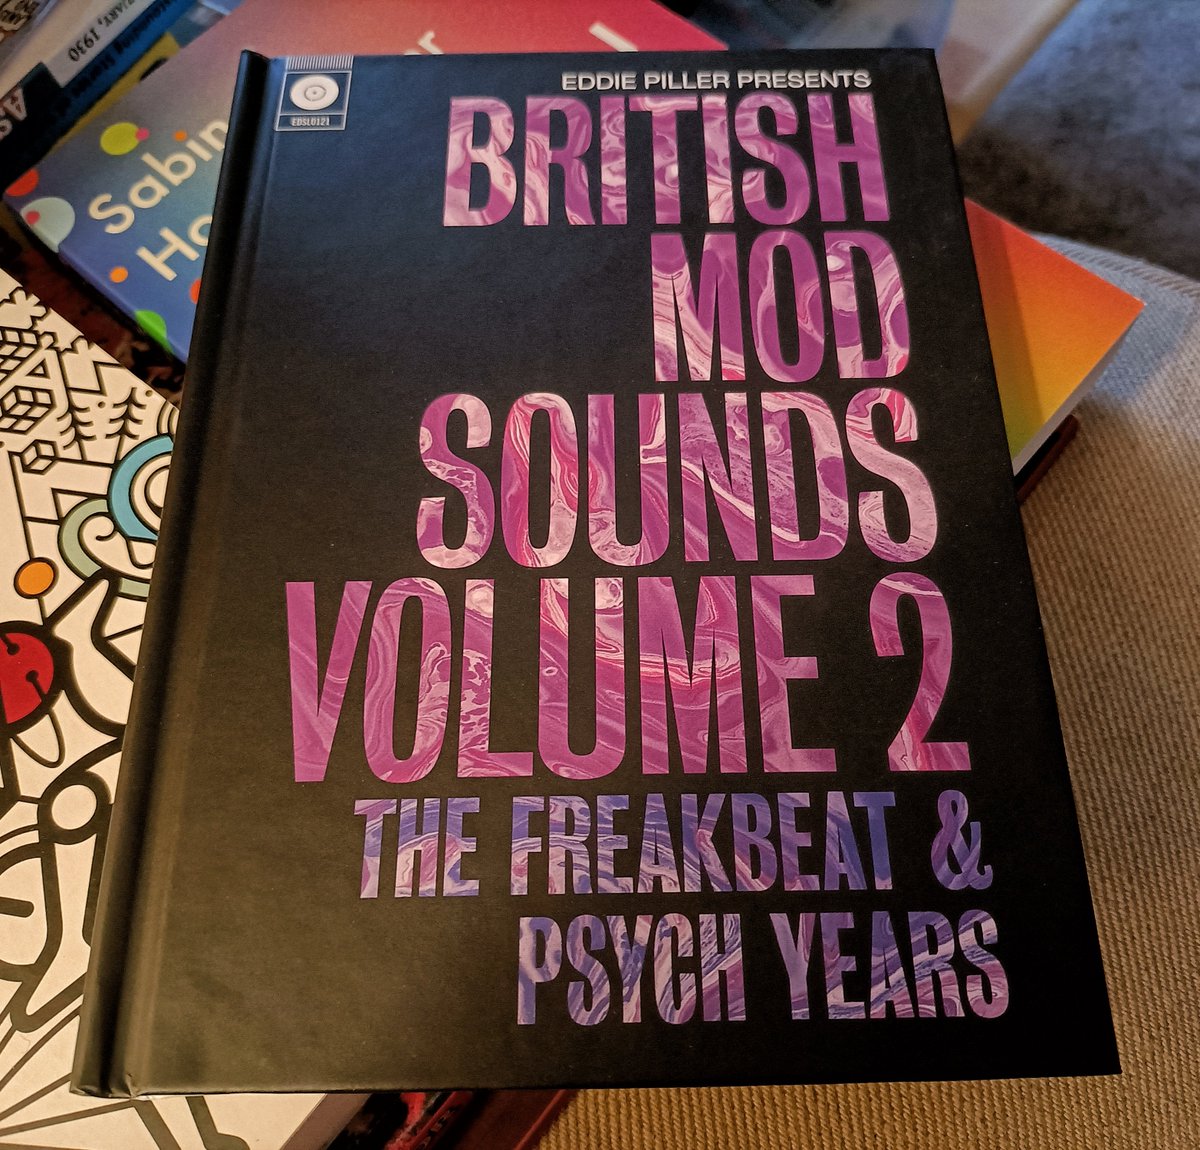 #nowplaying Various Artists - British Mod Sounds Volume 2, the freakbeat and psych years (Edsel, 2023) 4 x CD treasure trove of psychedelic pop and rock incl a superb version of The Beatles 'Taxman' by Loose Ends #psychedelia #freakbeat #mods